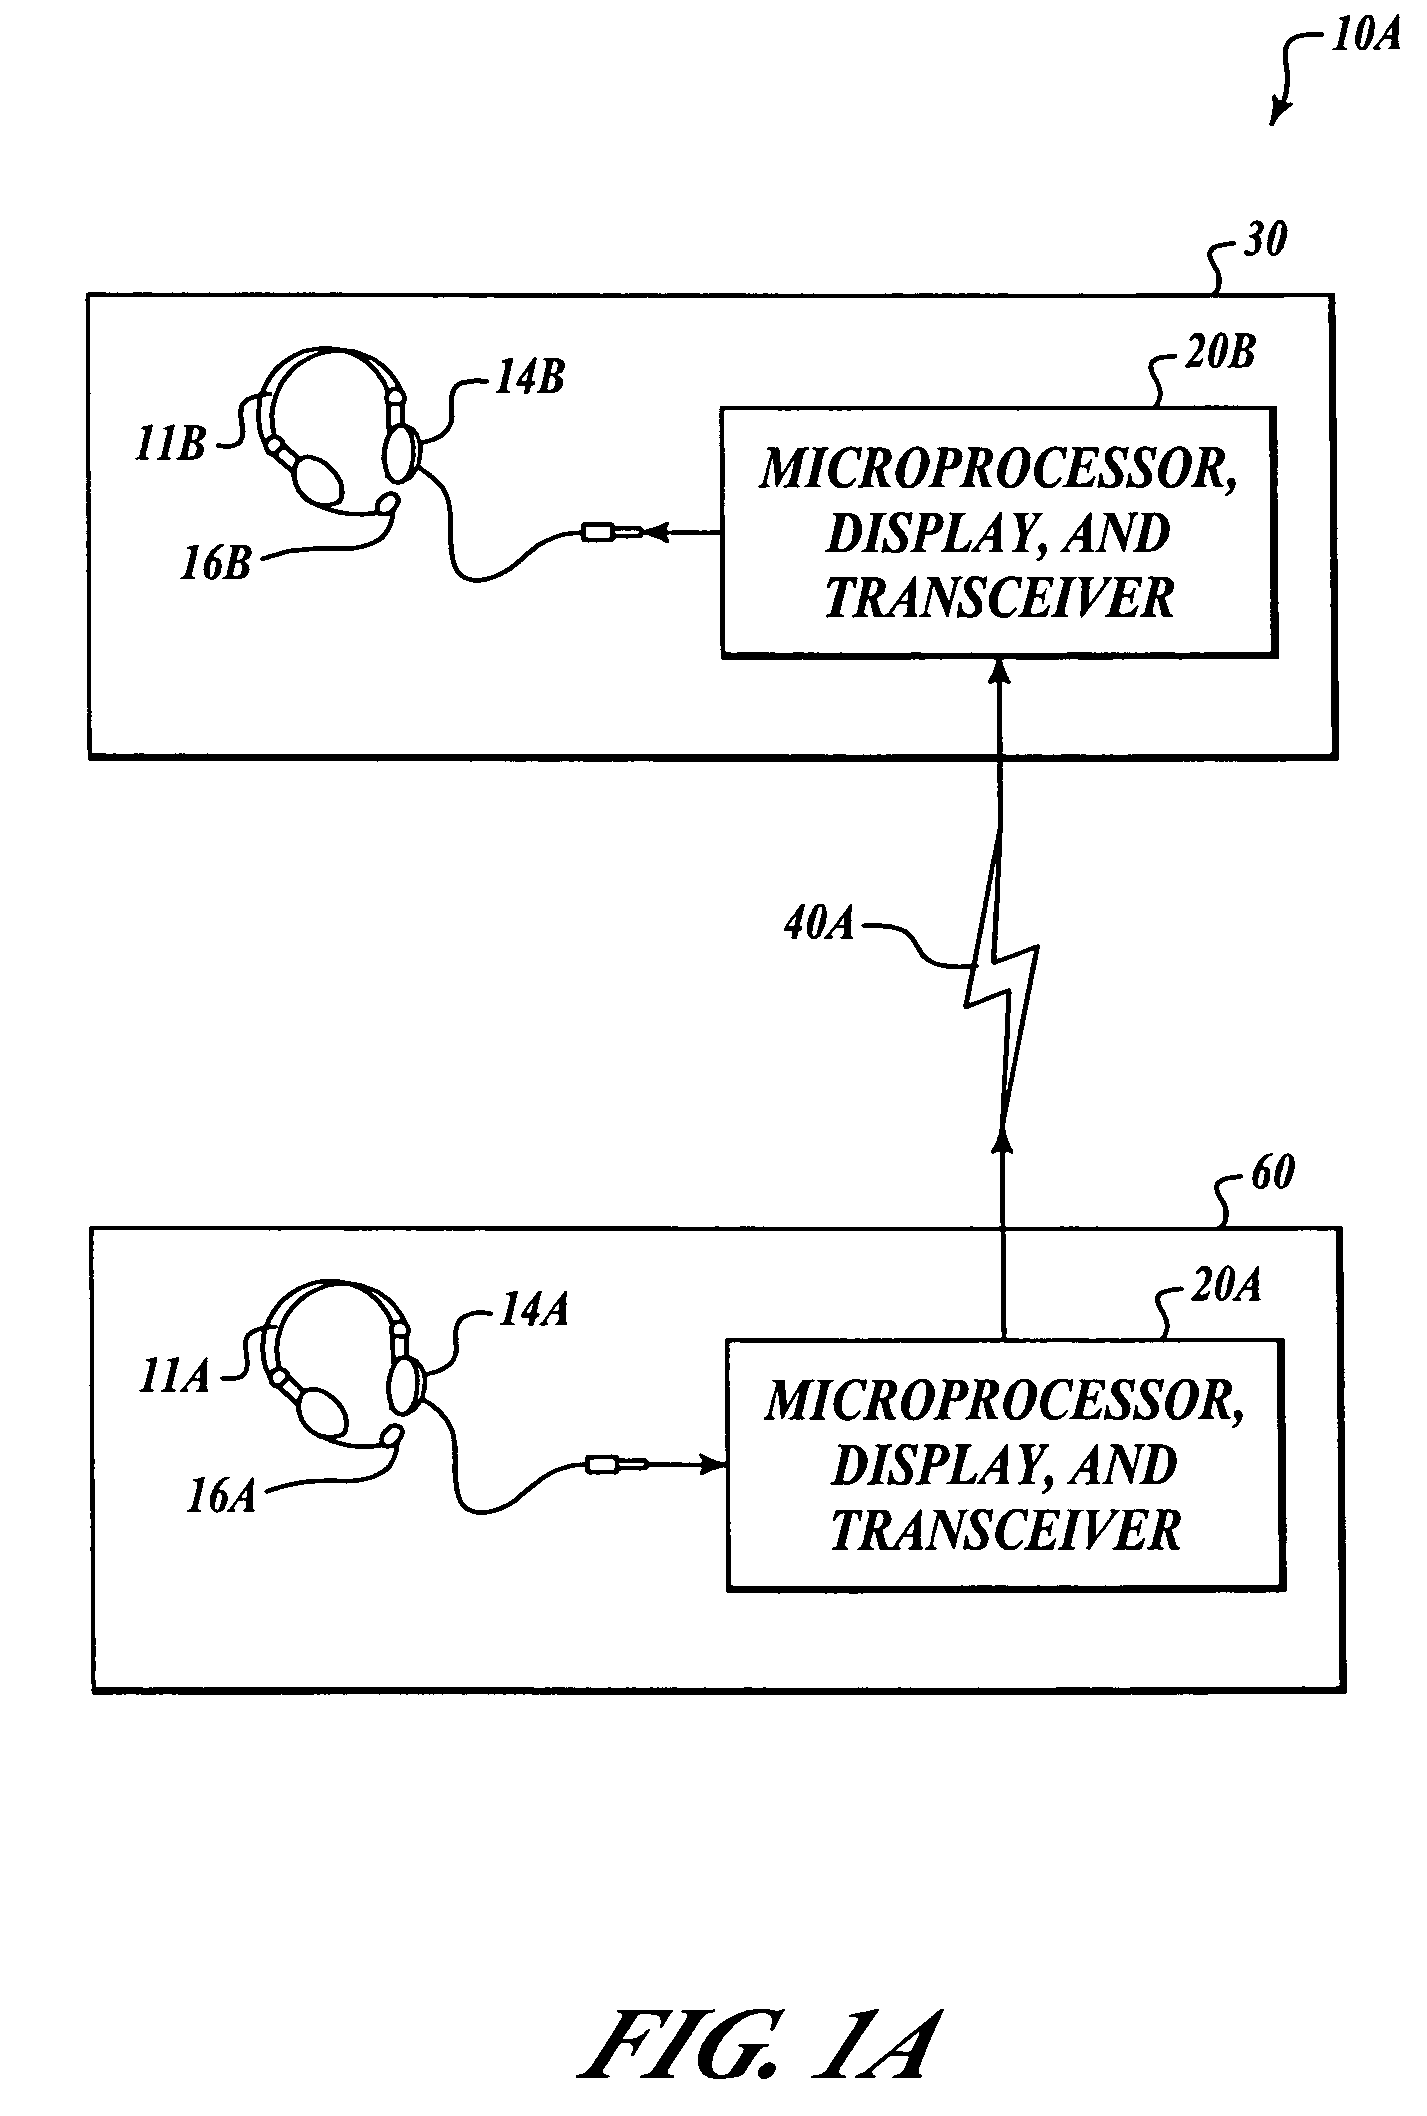 Systems and method of datalink auditory communications for air traffic control